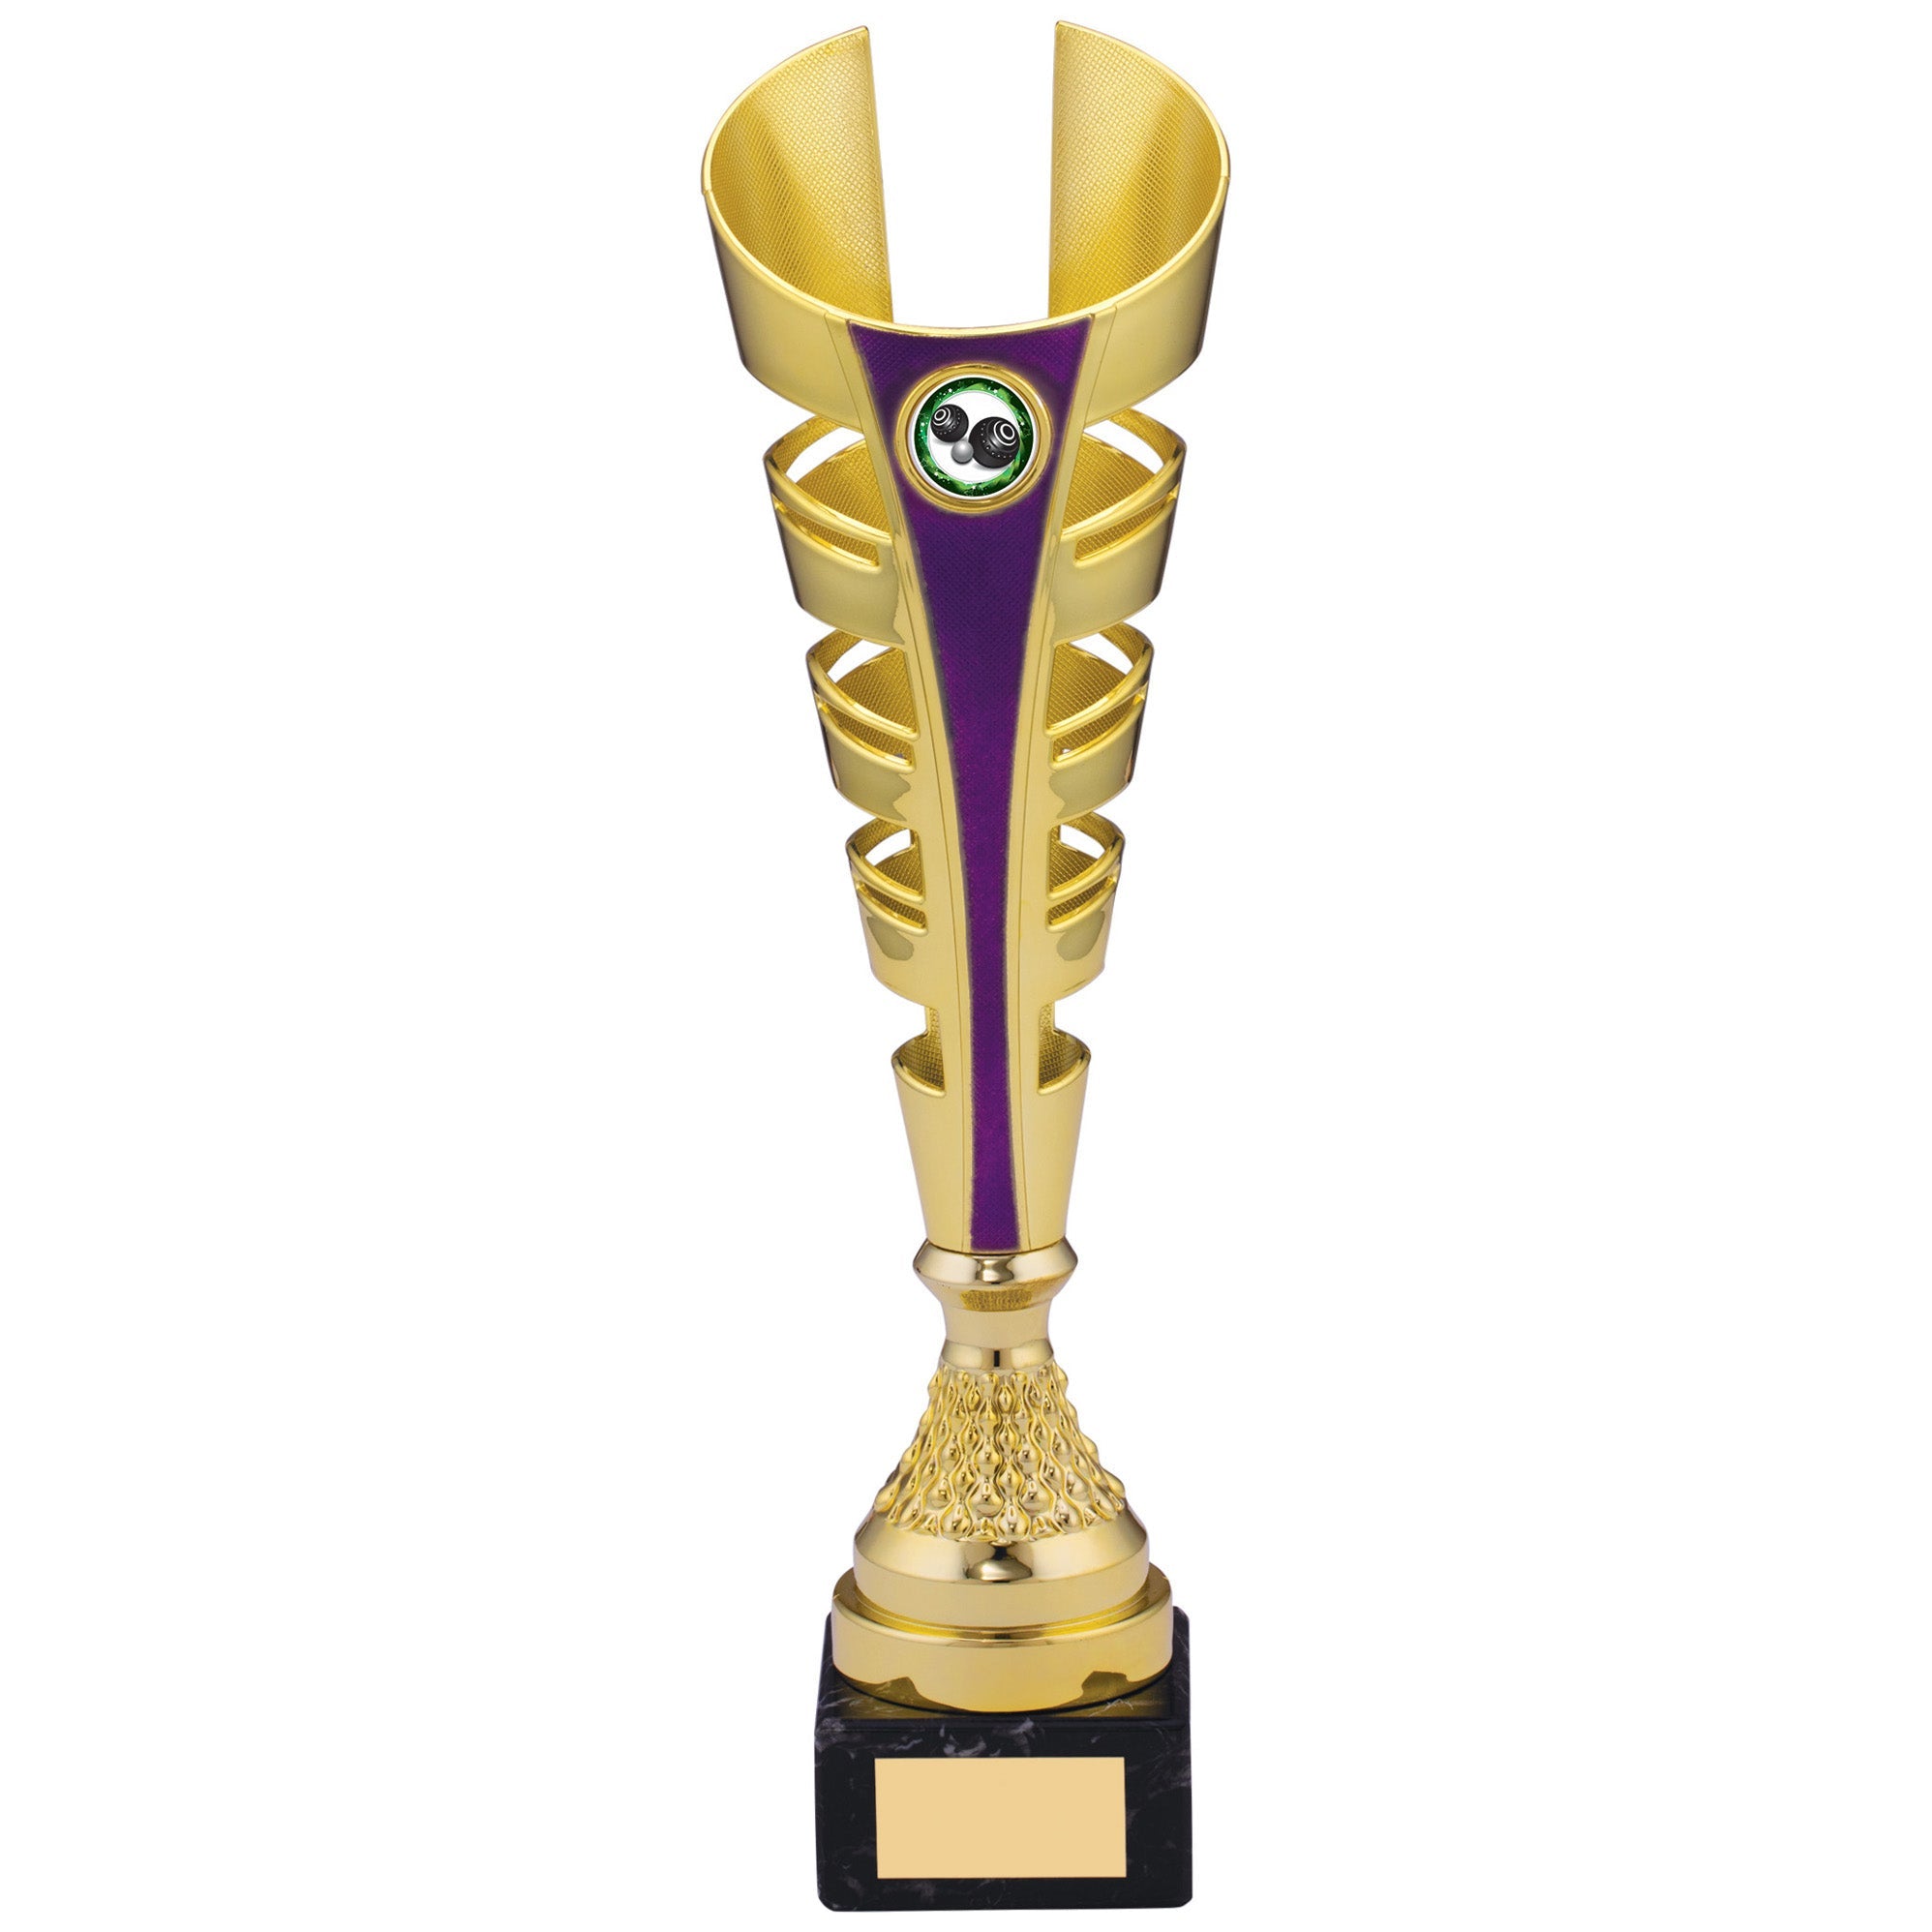 Gold and Purple Futuristic Plastic Trophy Cup on Marble Base